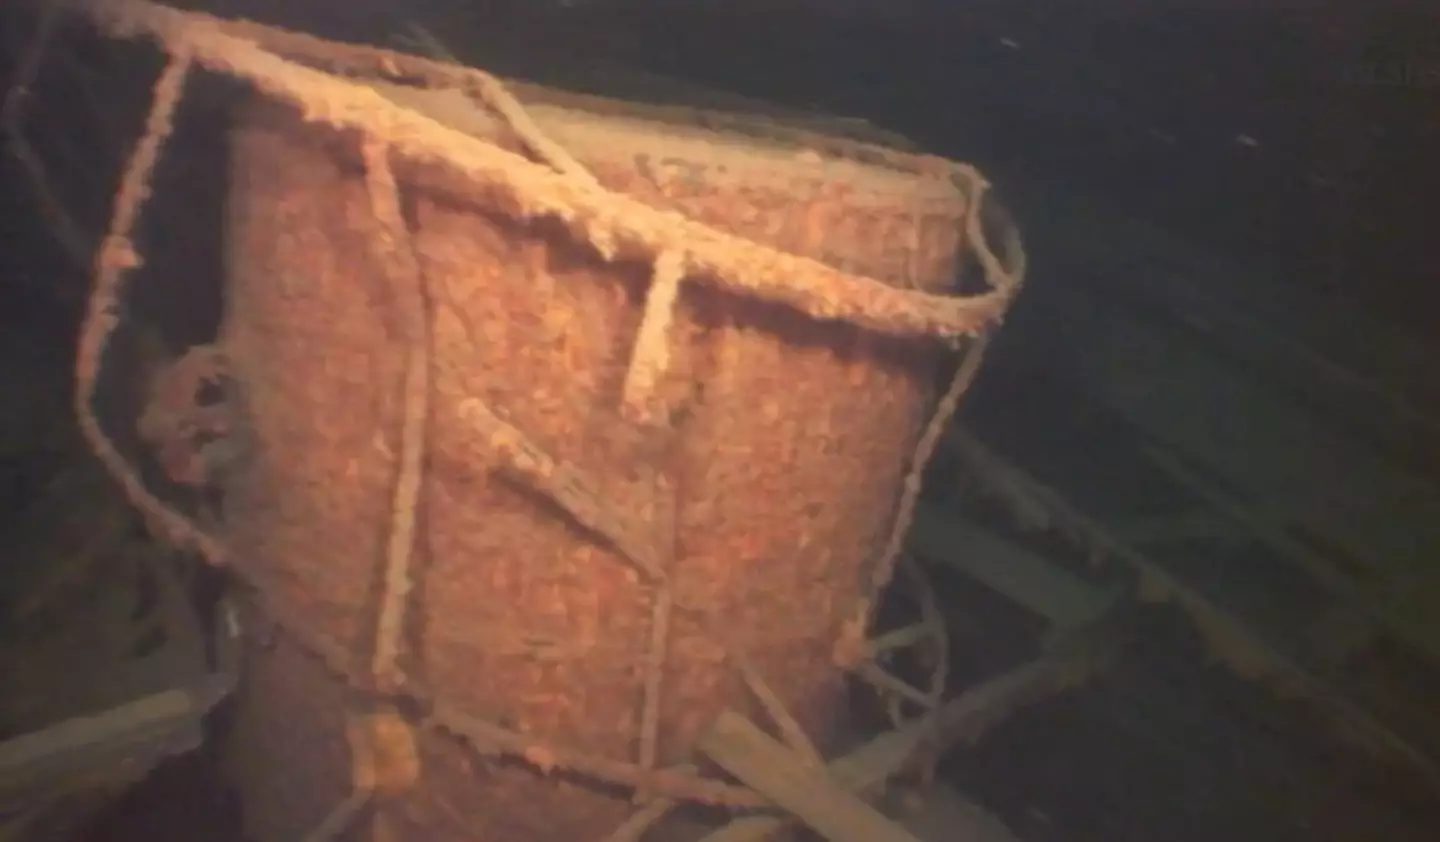 Over a century after it sunk the vessel was discovered again. (The Great Lakes Shipwreck Historical Society)